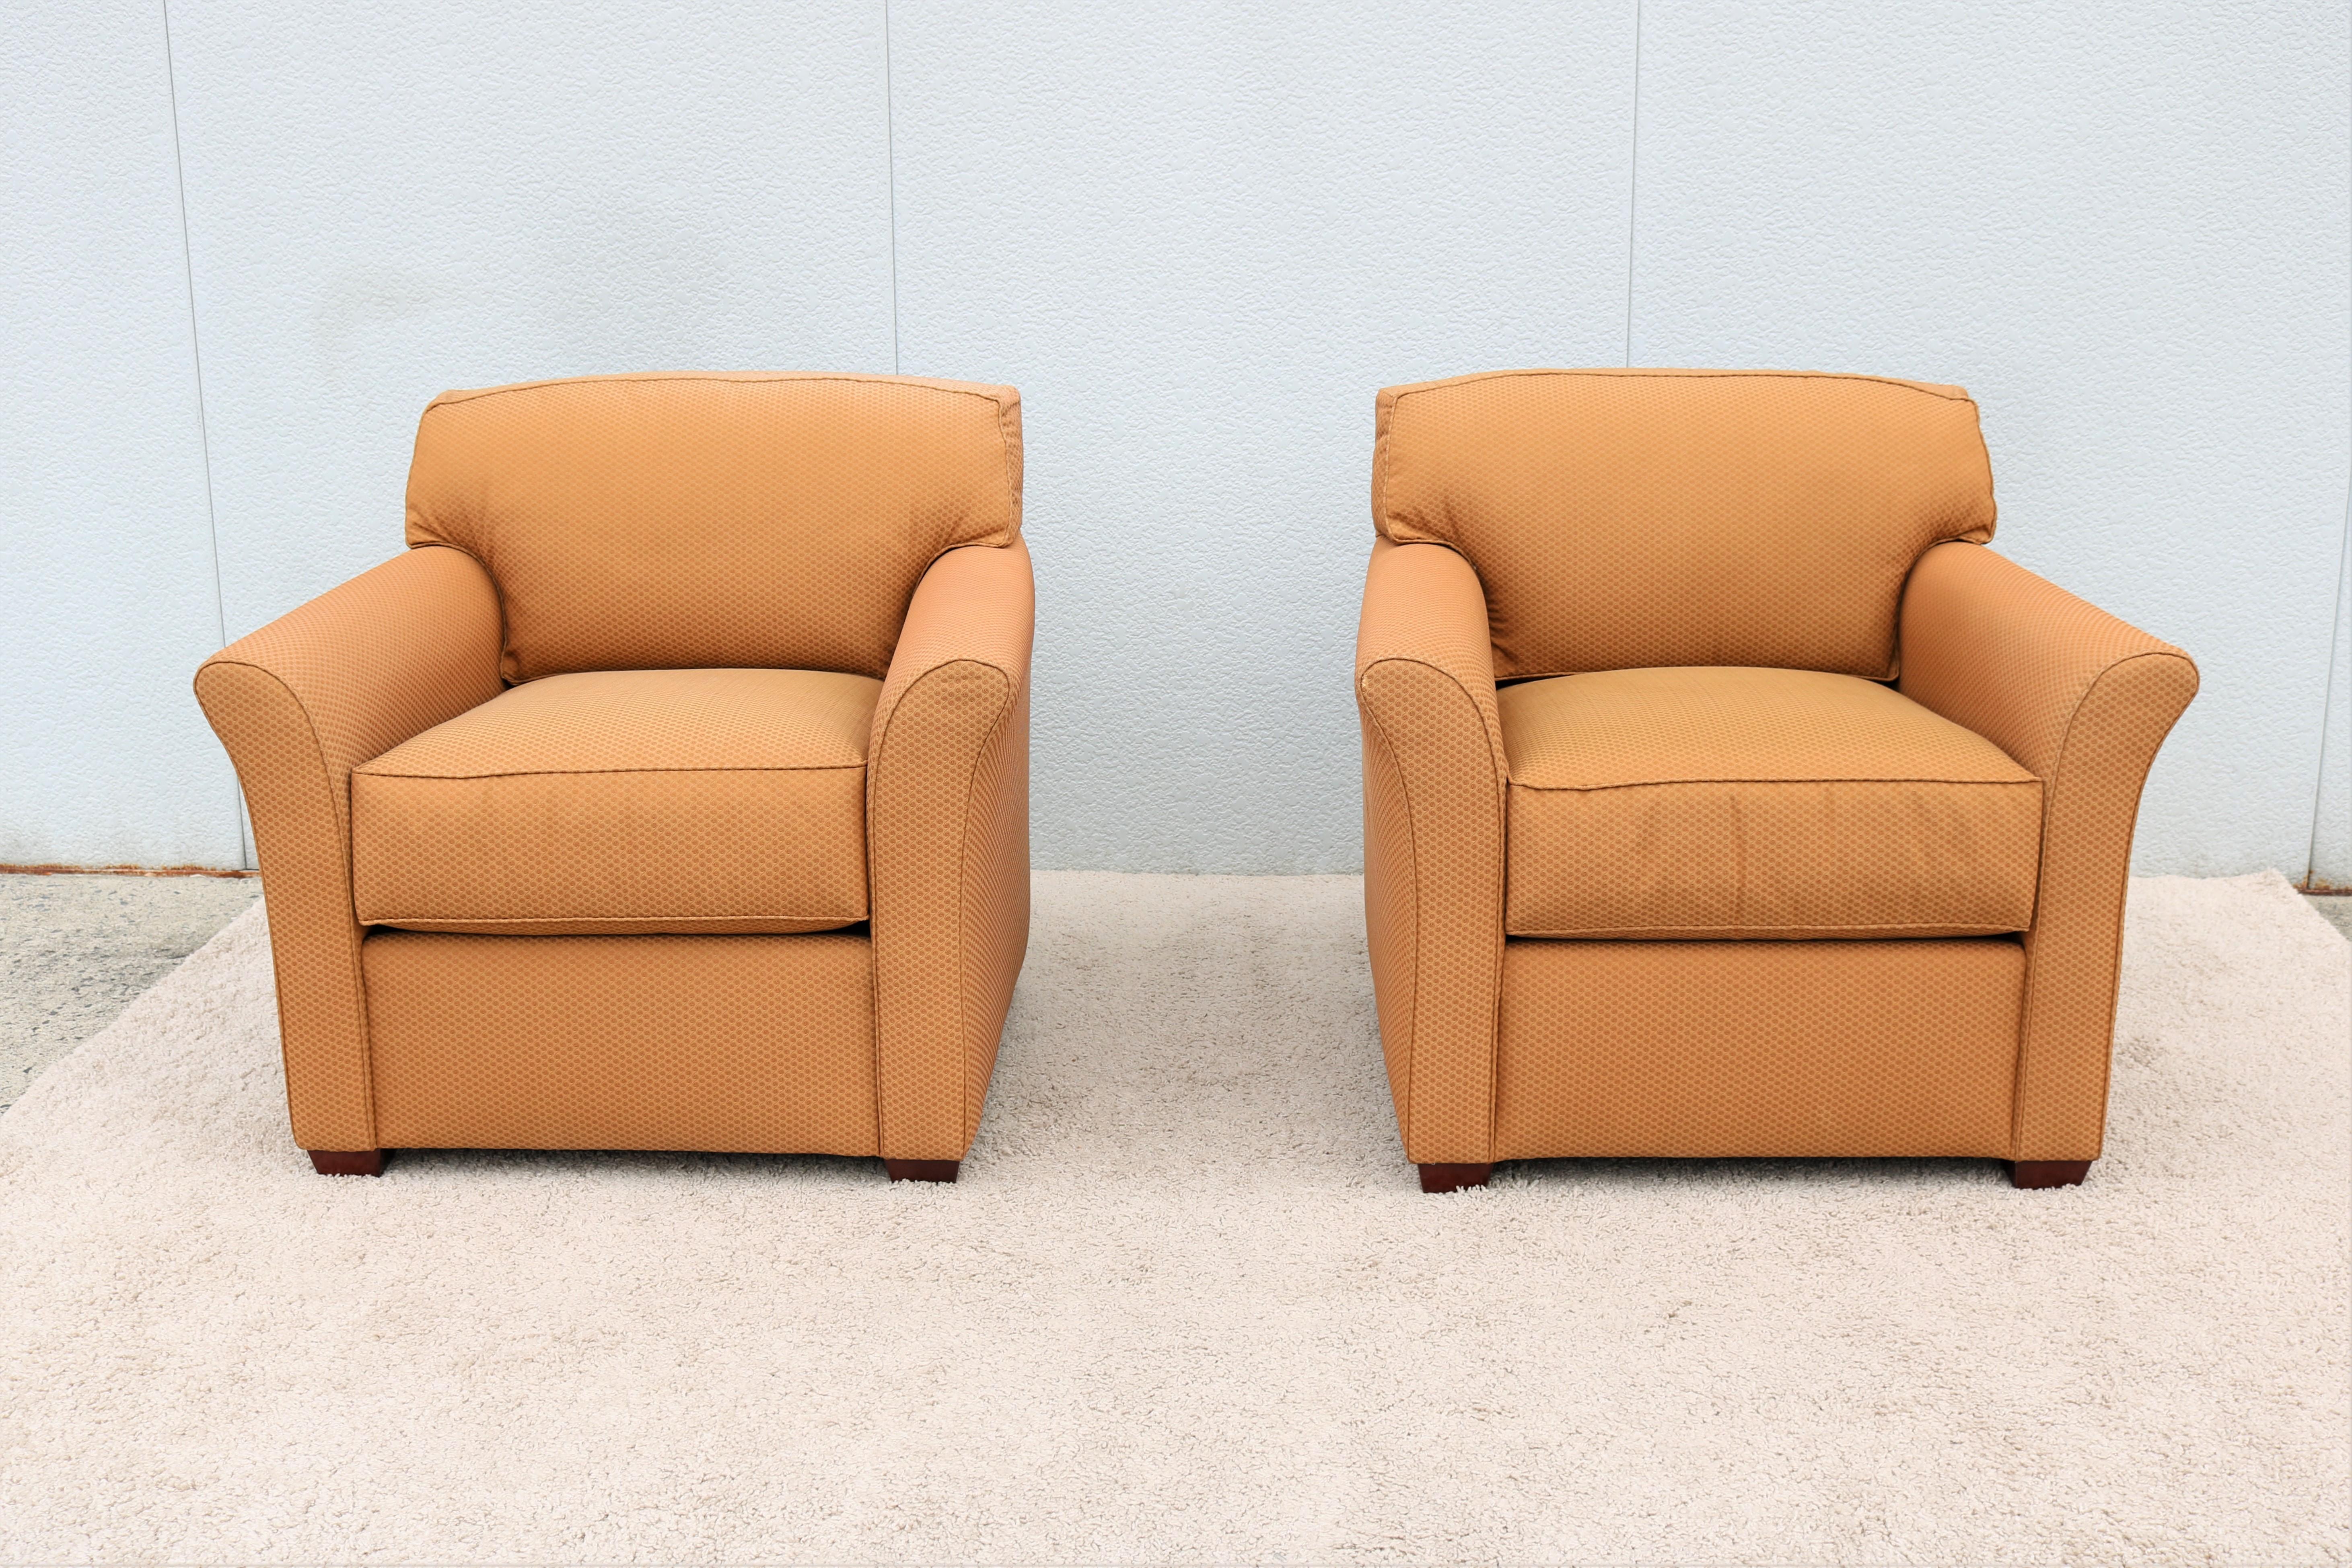 This high-end quality pair of lounge chairs by Bernhardt, are very comfortable and extremely supportive.
Features a firmly stuffed back cushion with rolled arms and loose seat cushions with removable covers.
The Lawson is considered to be the lounge